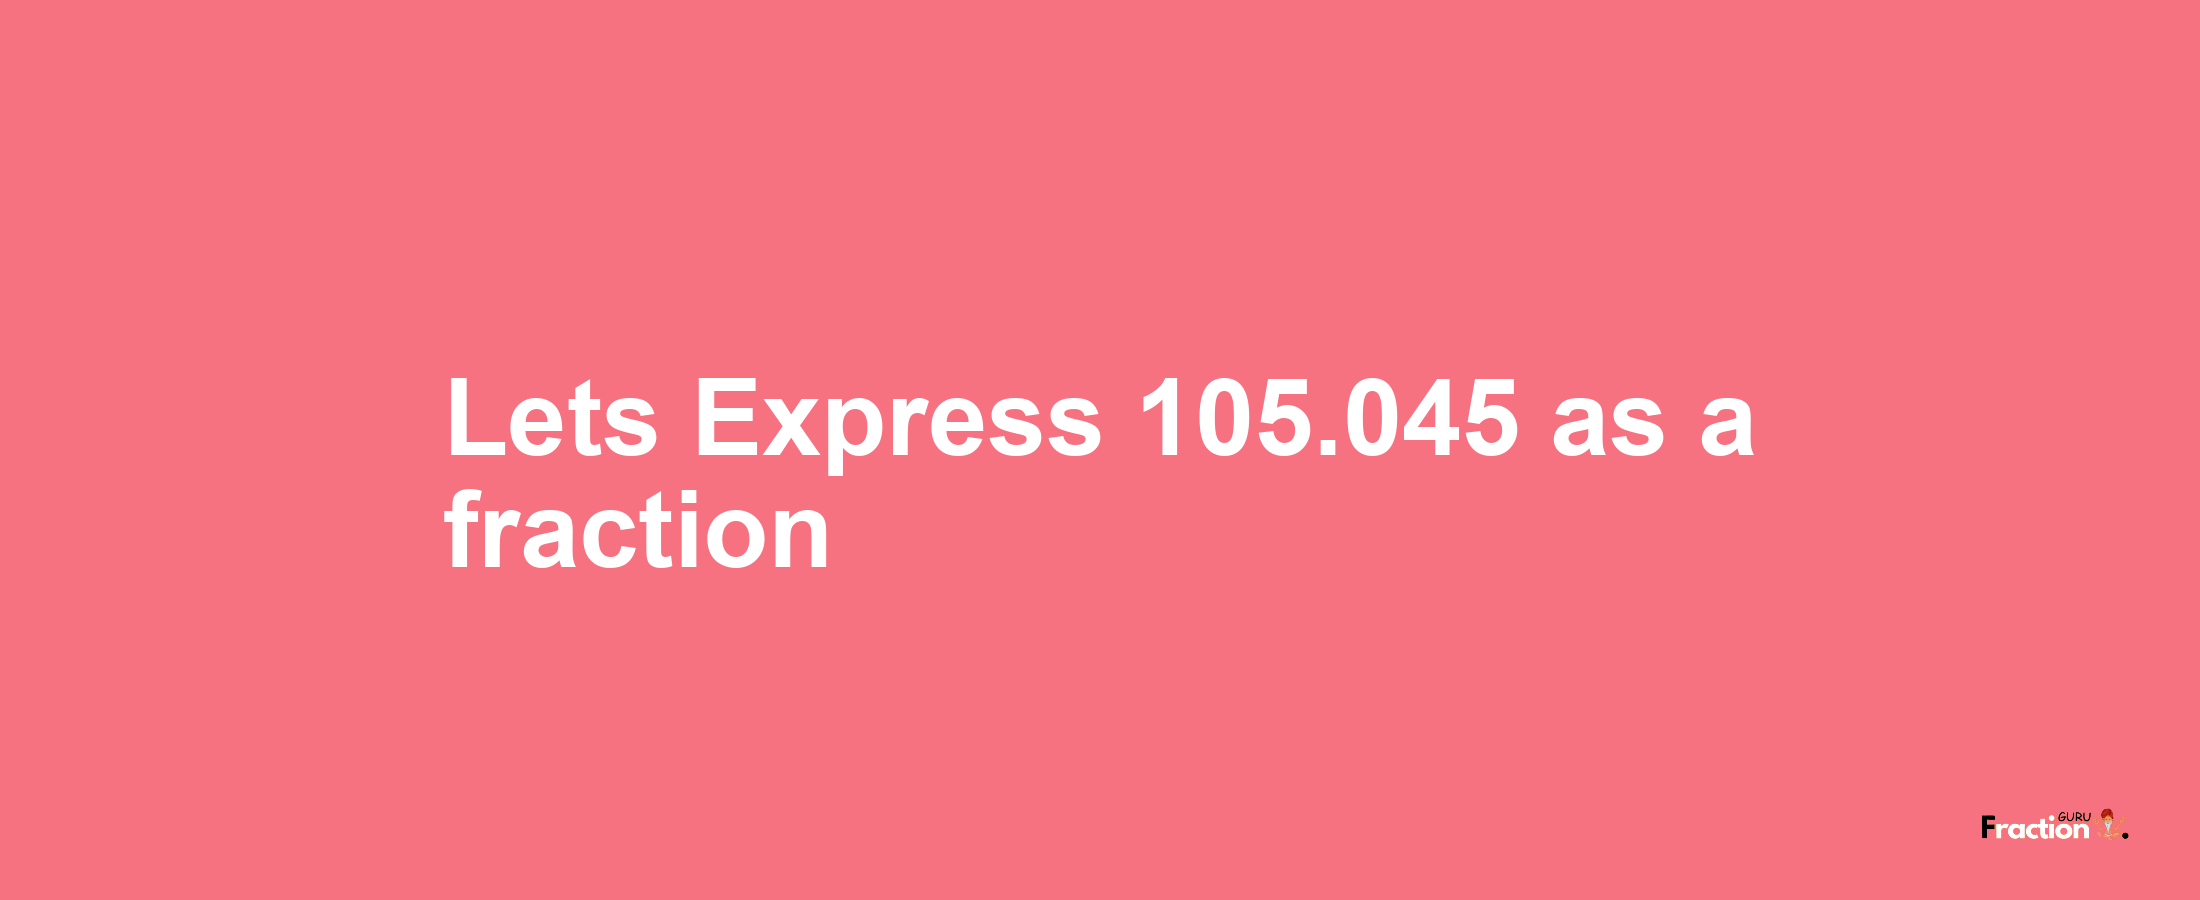 Lets Express 105.045 as afraction